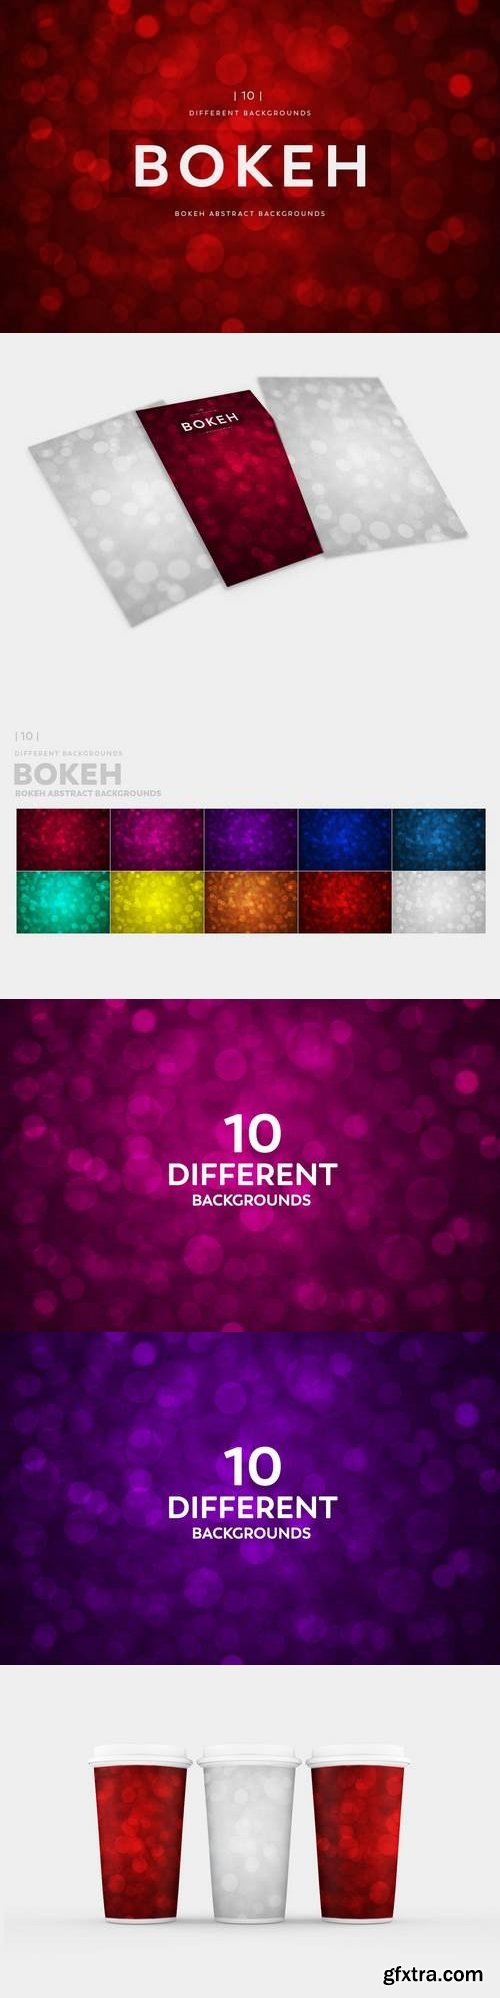 Bokeh Abstract Backgrounds